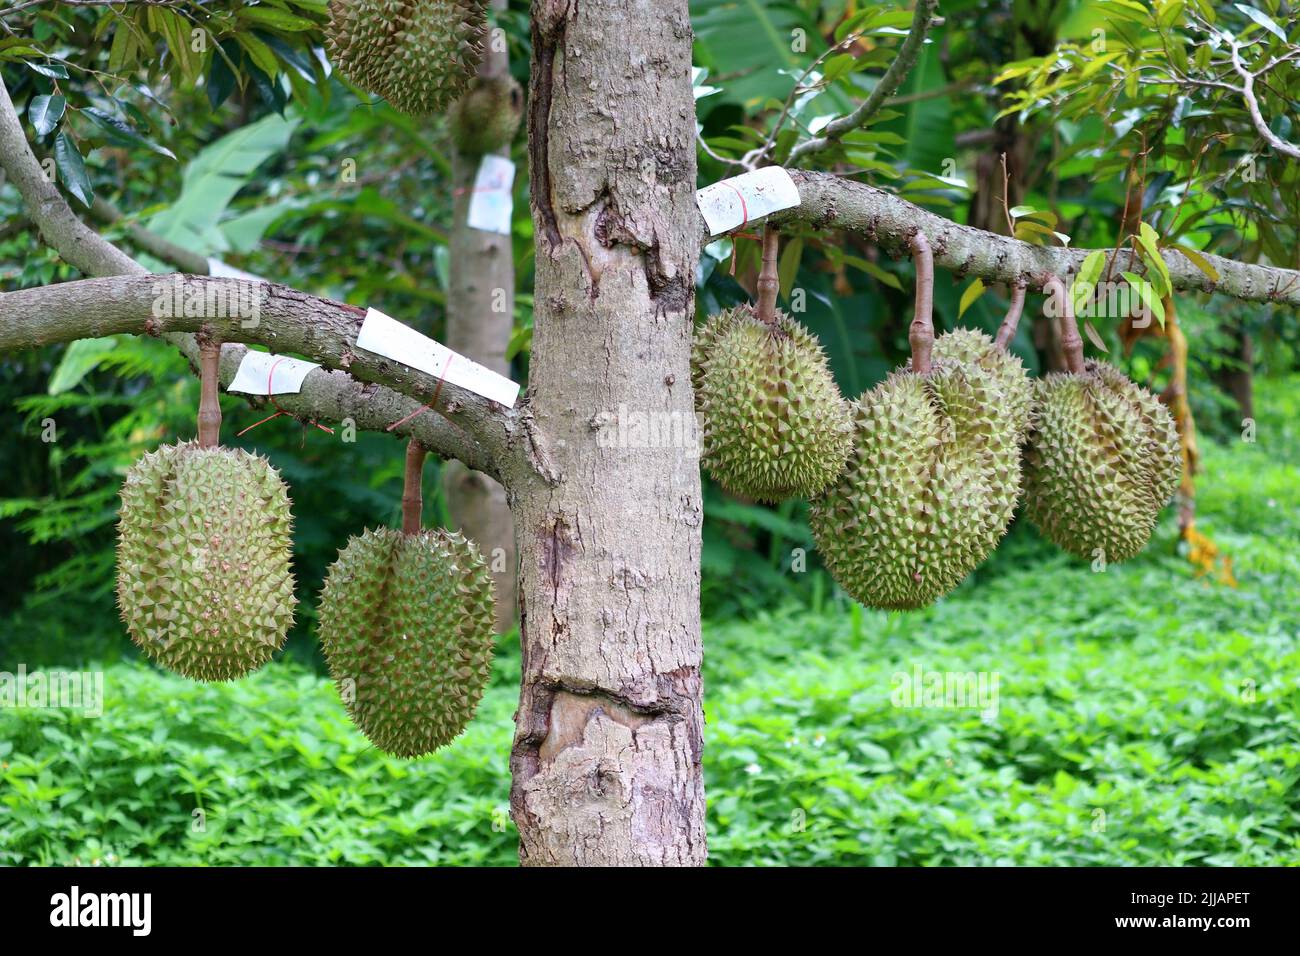 young durian fruit on tree in organic farm Stock Photo